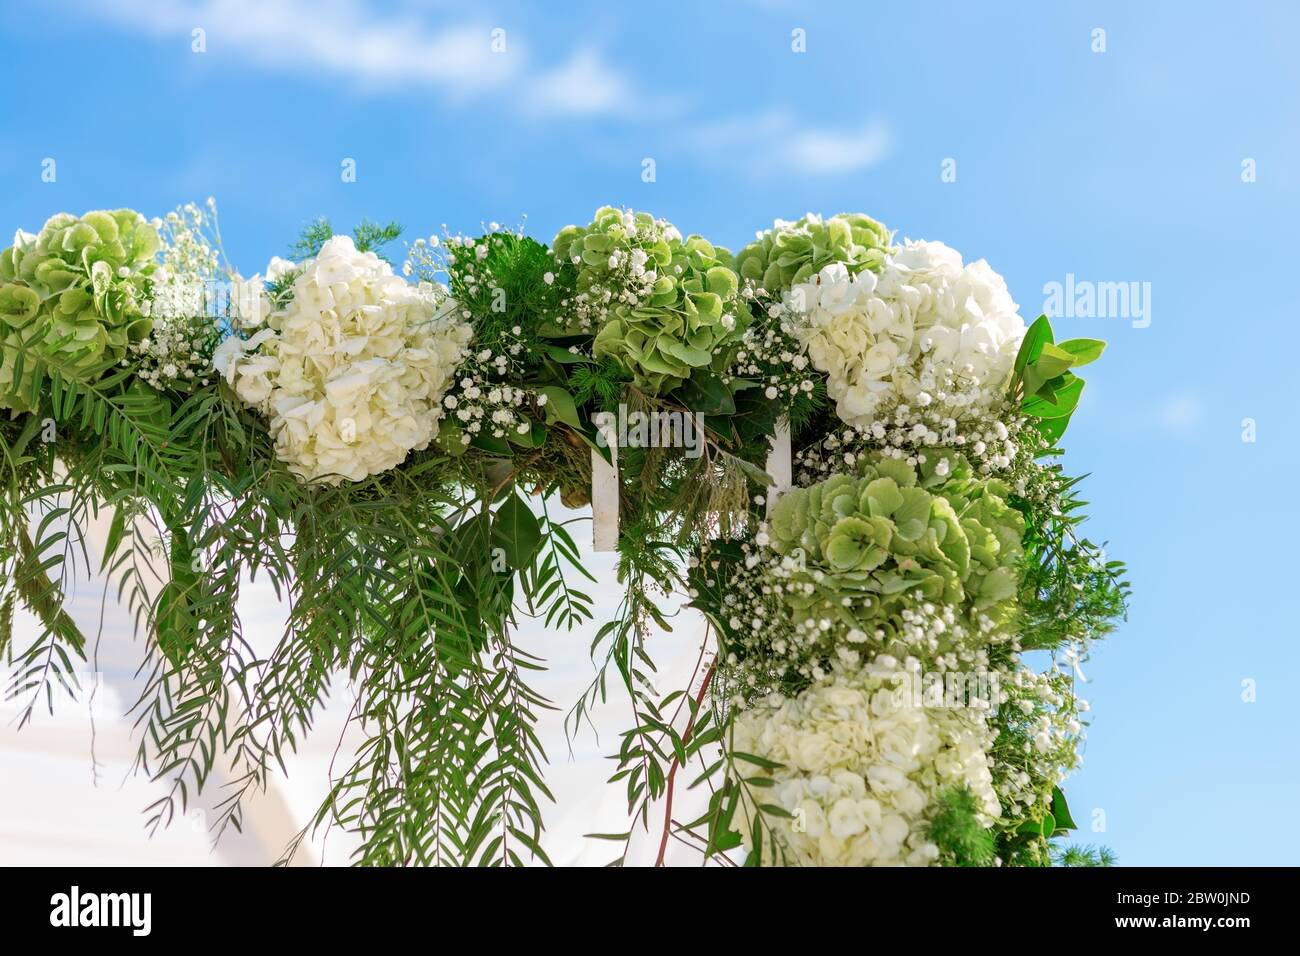 A wedding decorated with a luxurious arch of fresh flowers on a sunny day against a blue sky. Close-up. Stock Photo